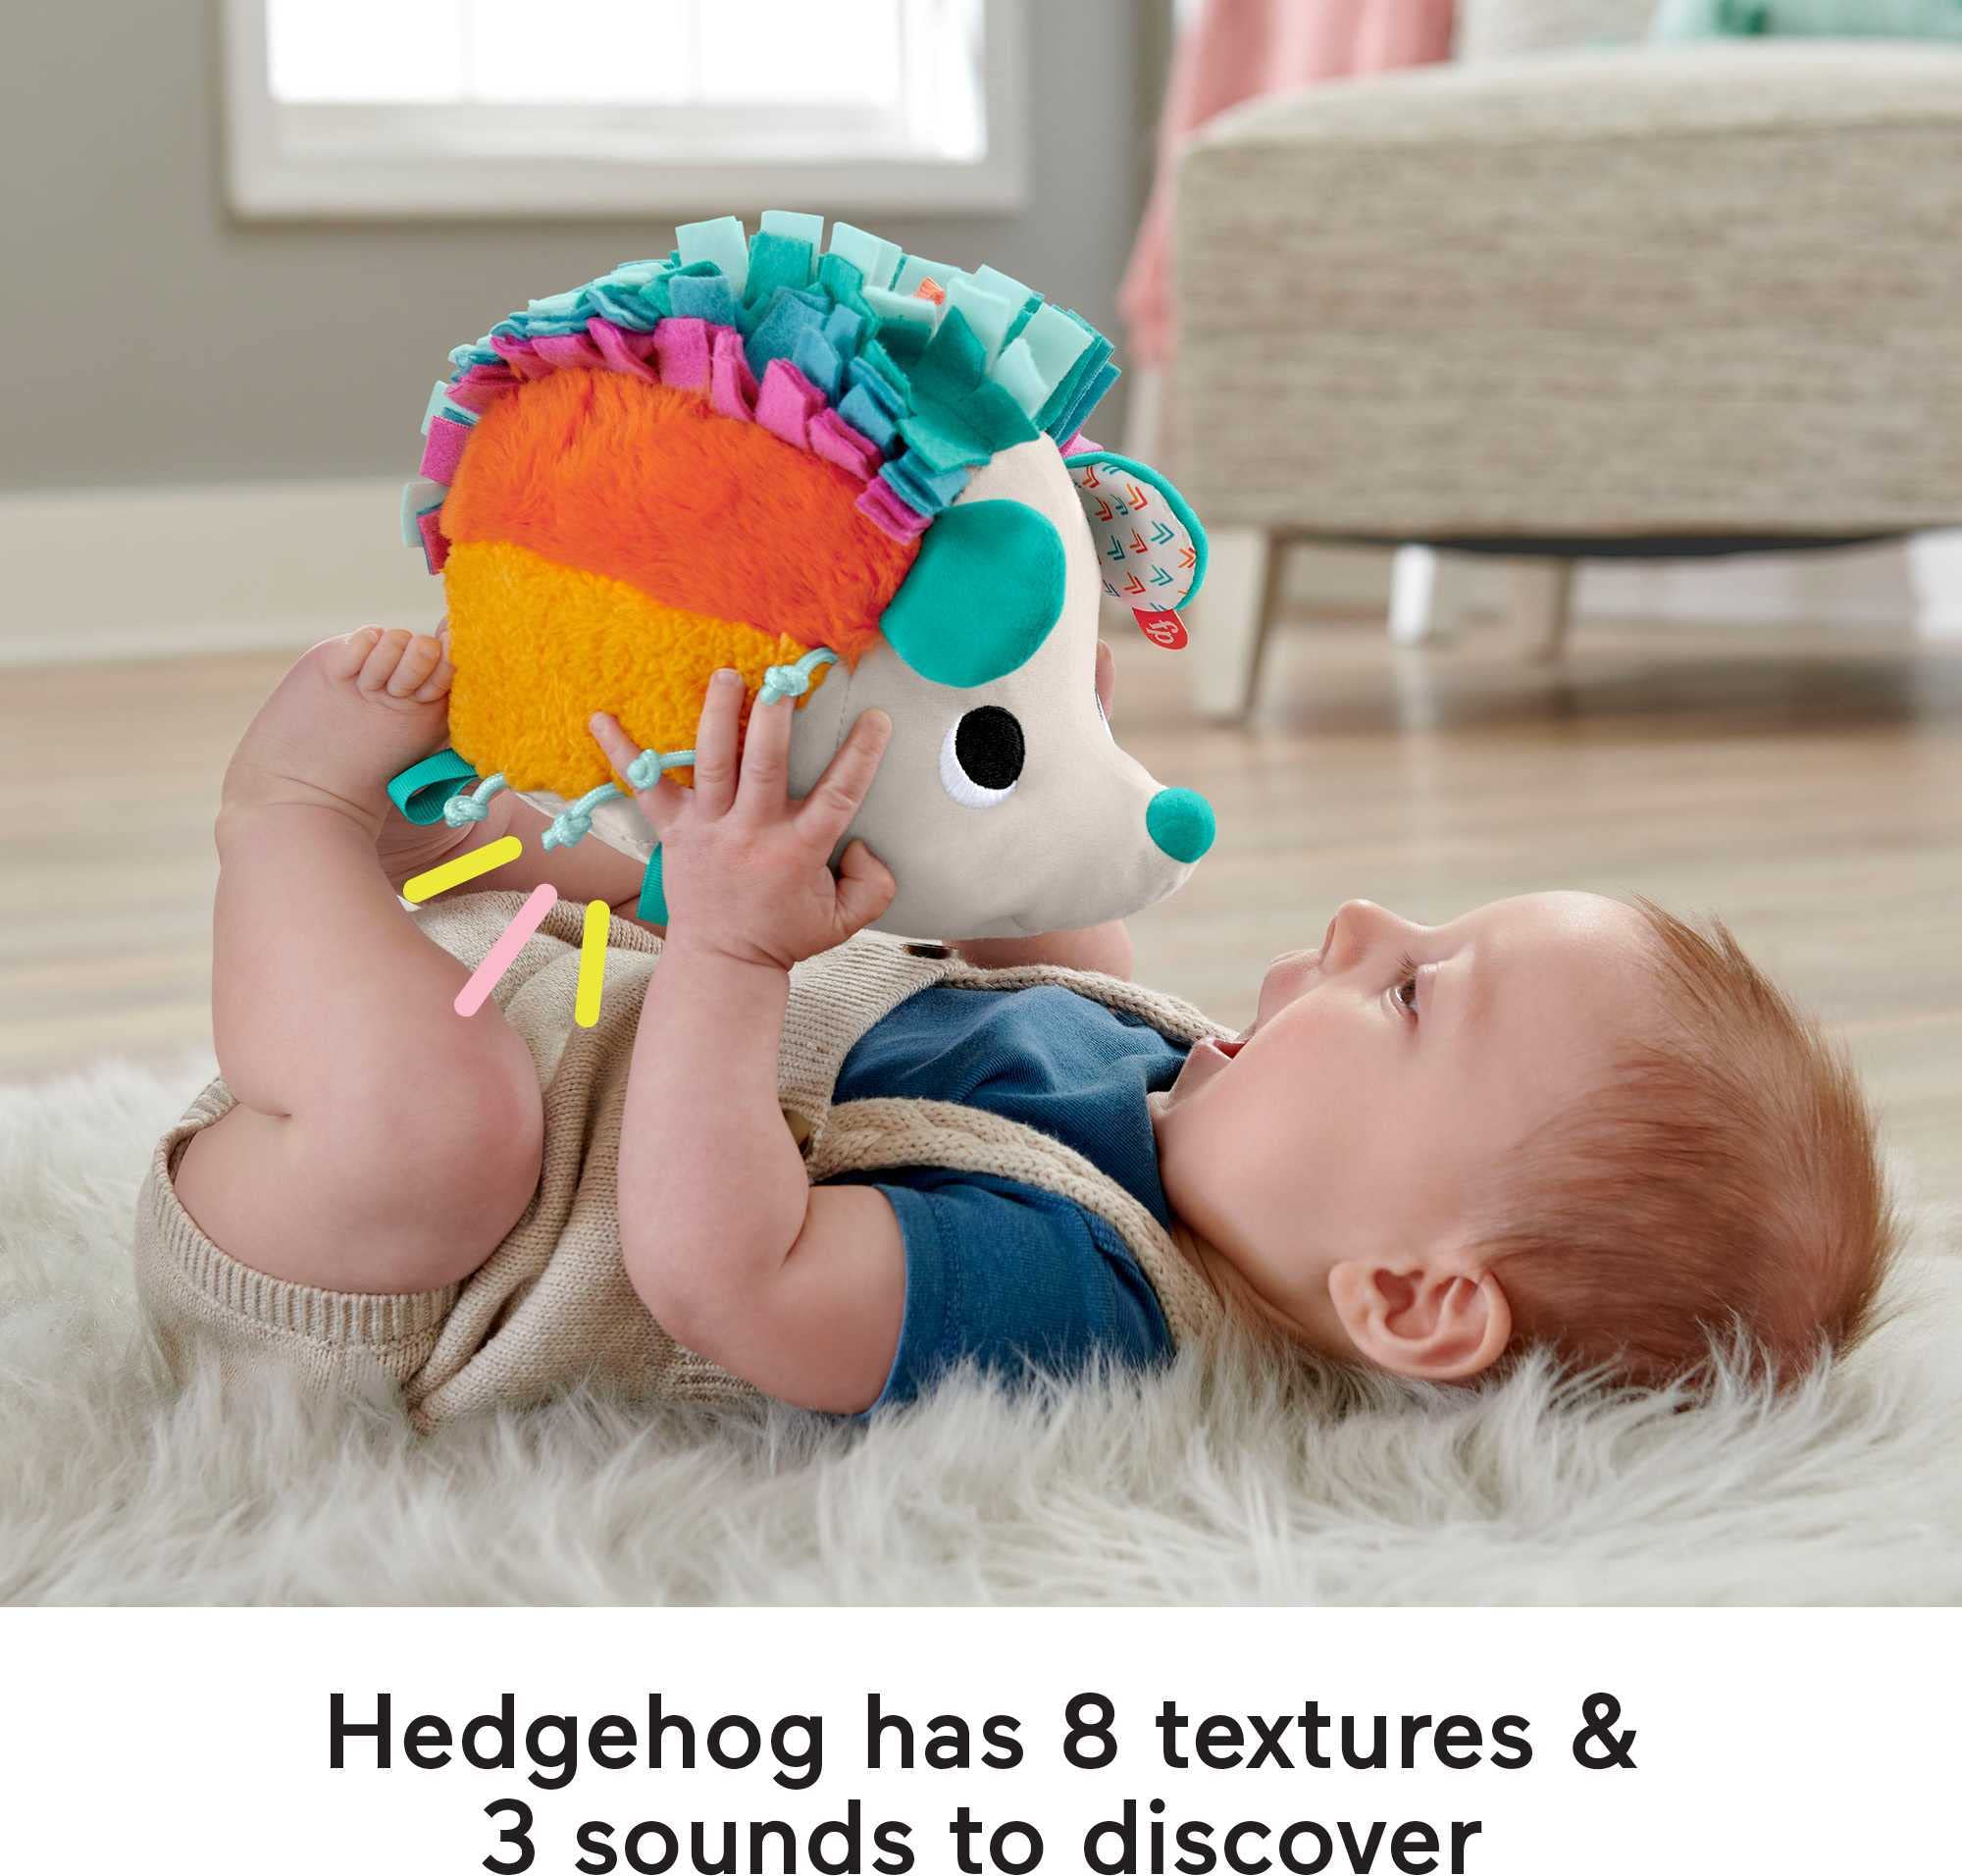 Fisher-Price Baby Gift Set 3-In-1 Music, Glow And Grow Gym & Hedgehog Plush, Playmat With 5 Linkable Toys For Newborn Sensory Play